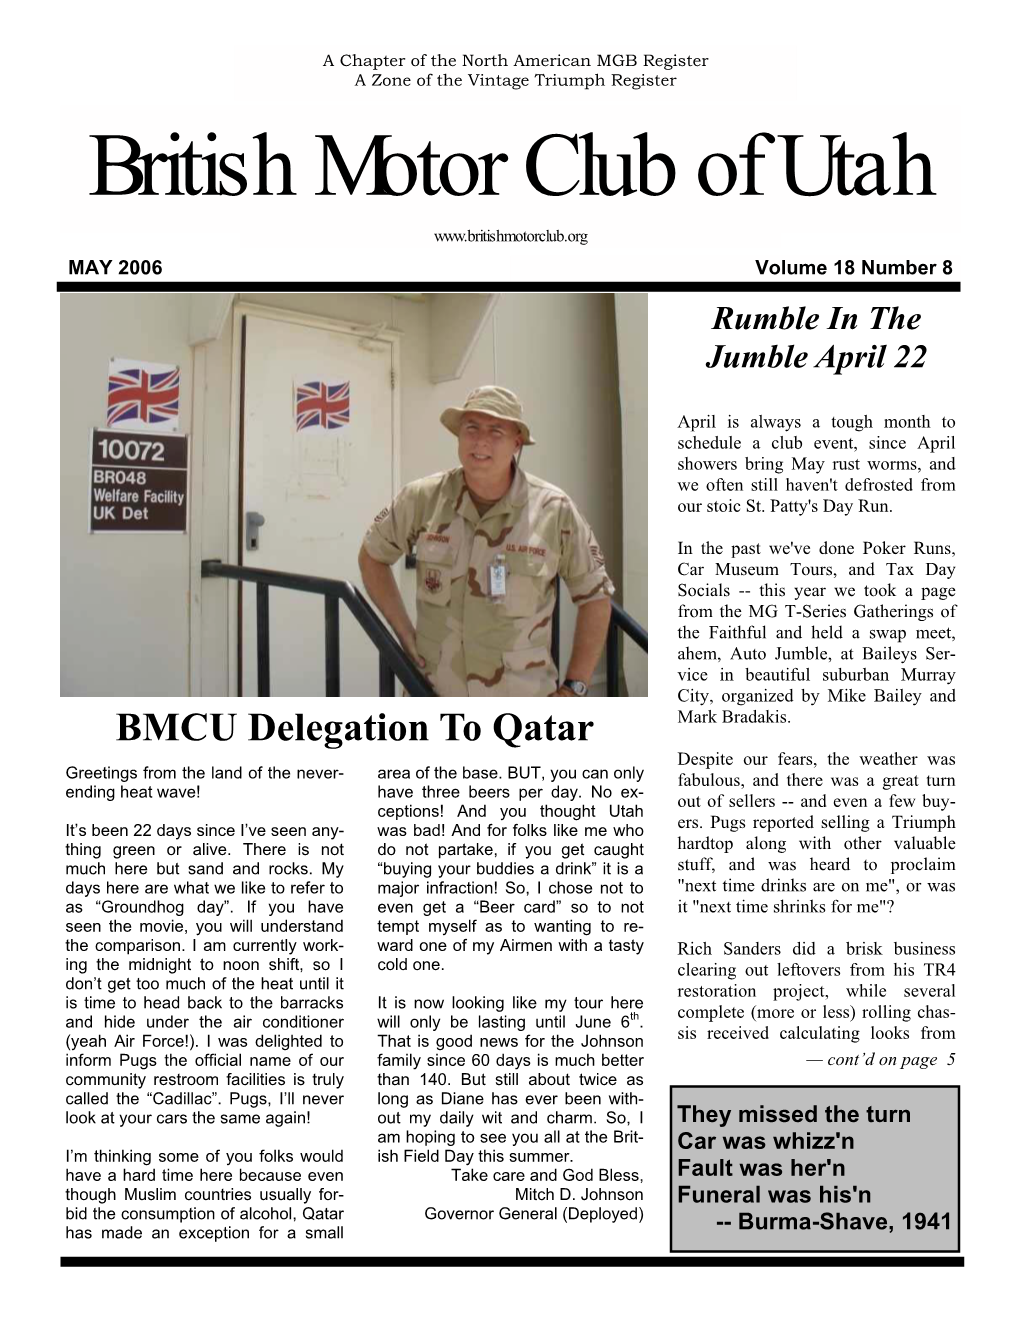 May 2006 Newsletter